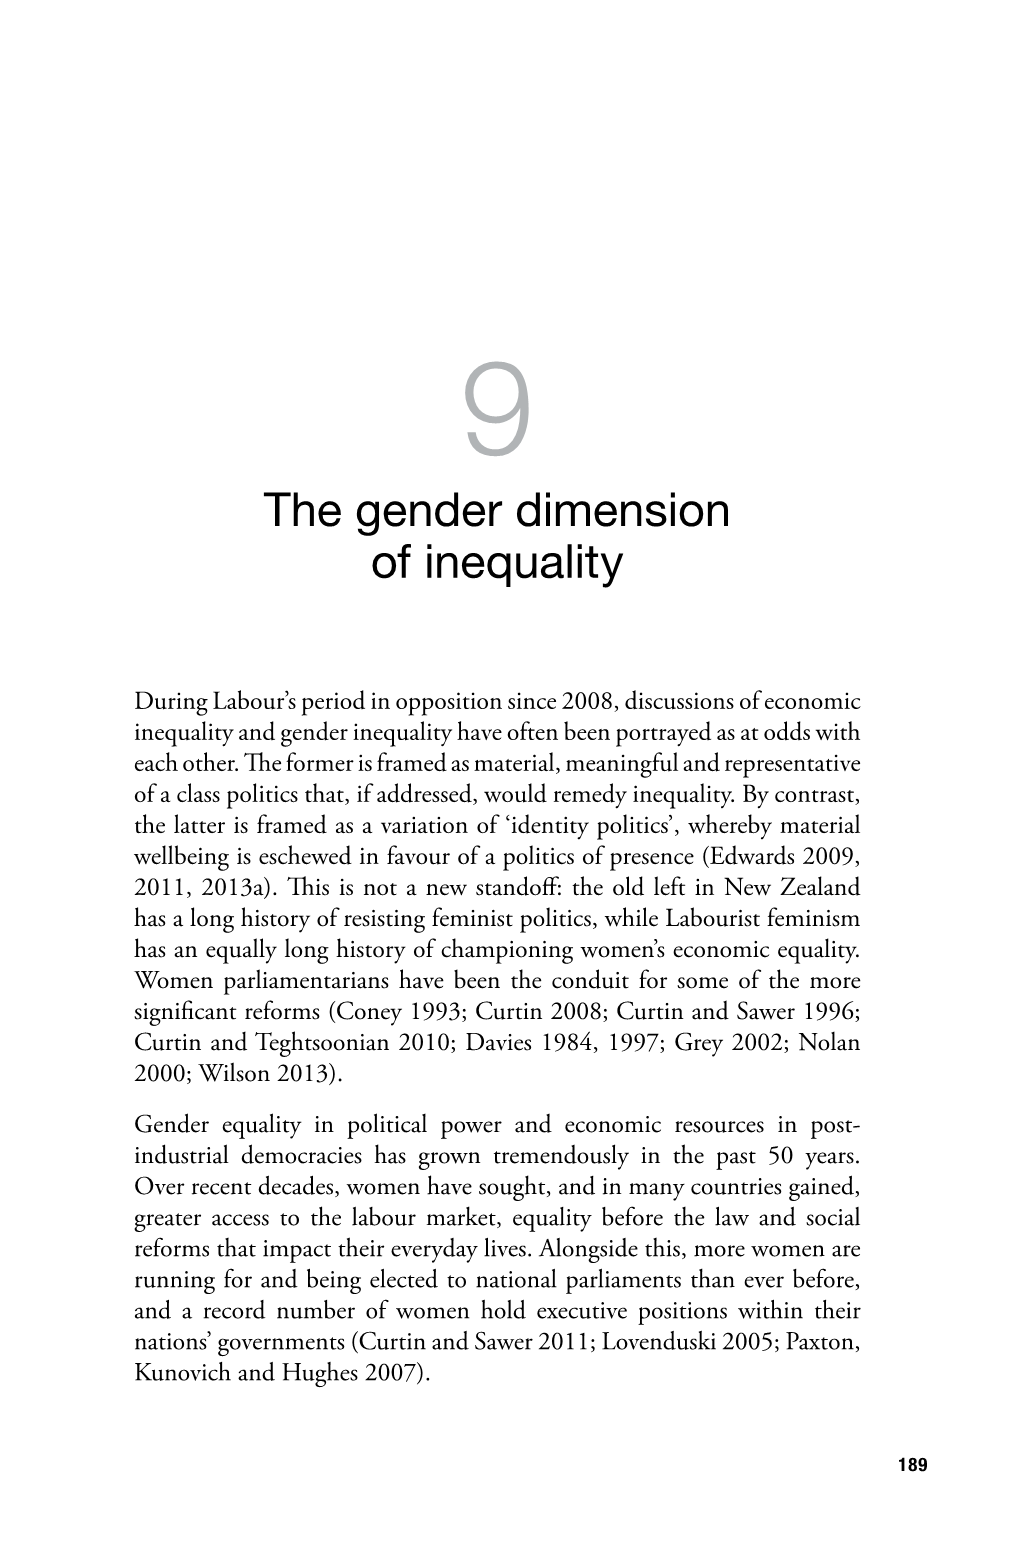 The Gender Dimension of Inequality